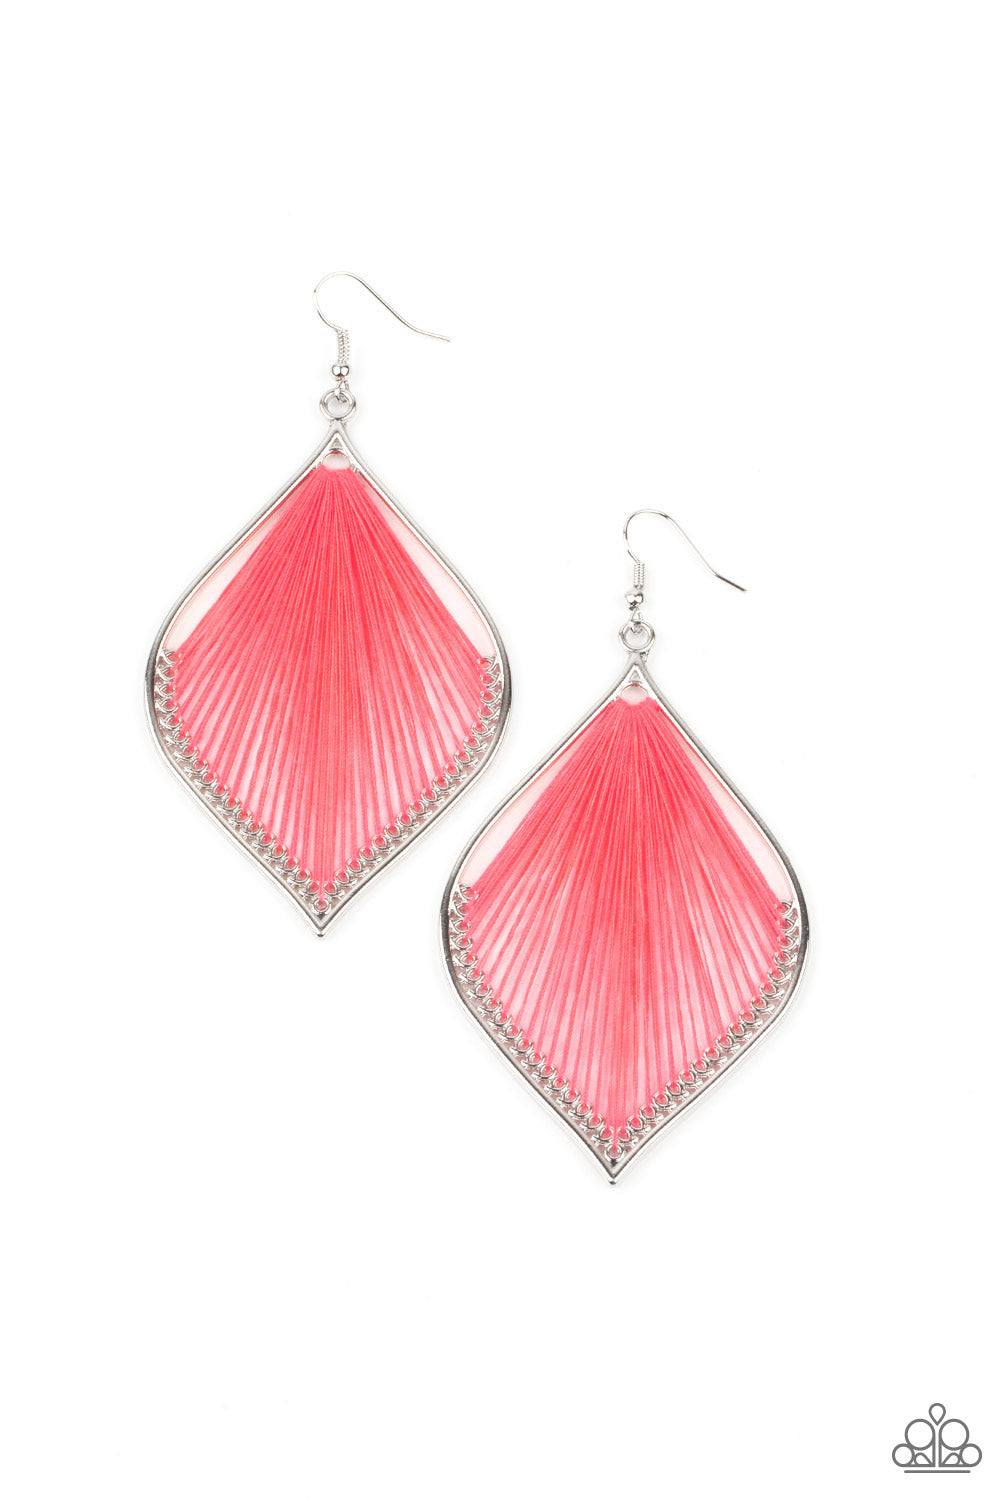 String Theory - Pink Earrings - Princess Glam Shop